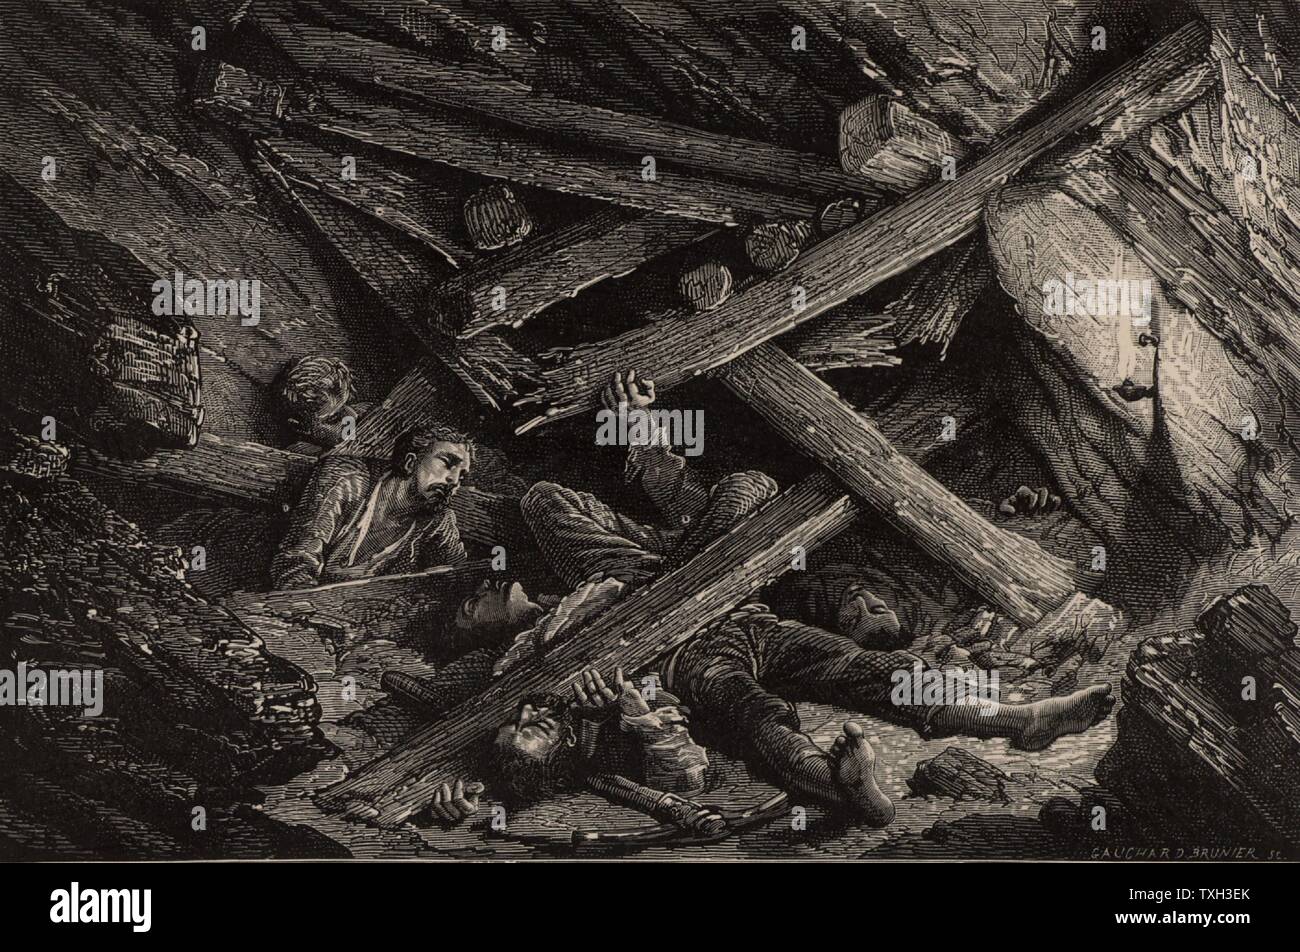 Coal miners killed and entombed by a roof fall. From 'Le Journal de la Jeunesse' (Paris, 1885). Engraving. Stock Photo